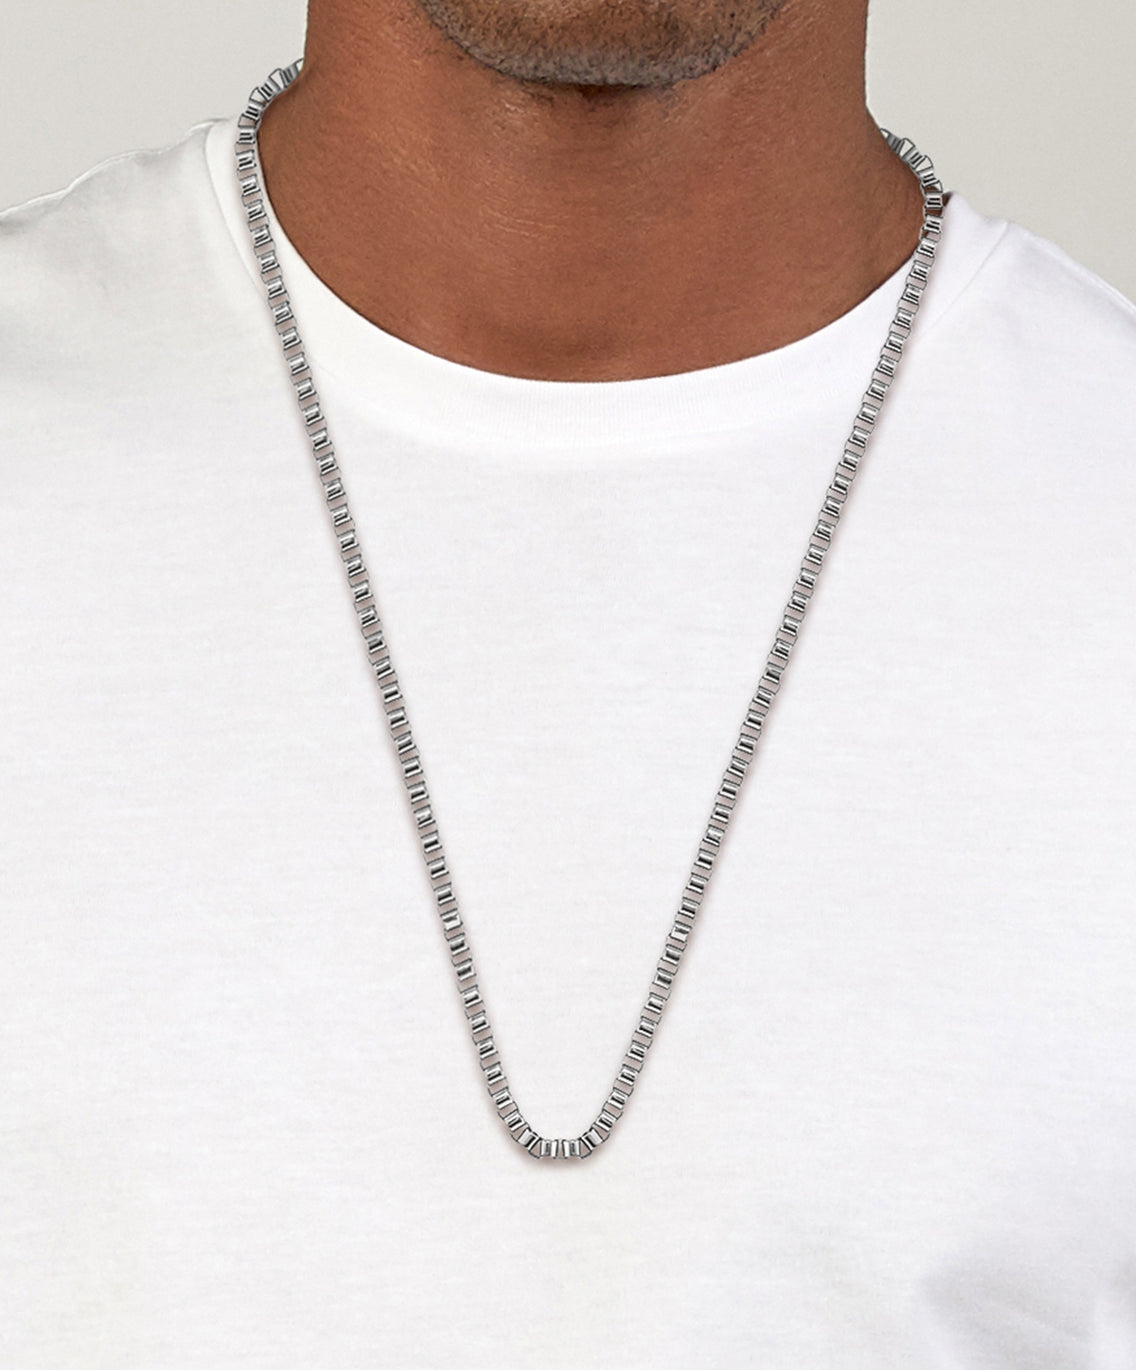 Boss Stainless Steel Chain Necklace